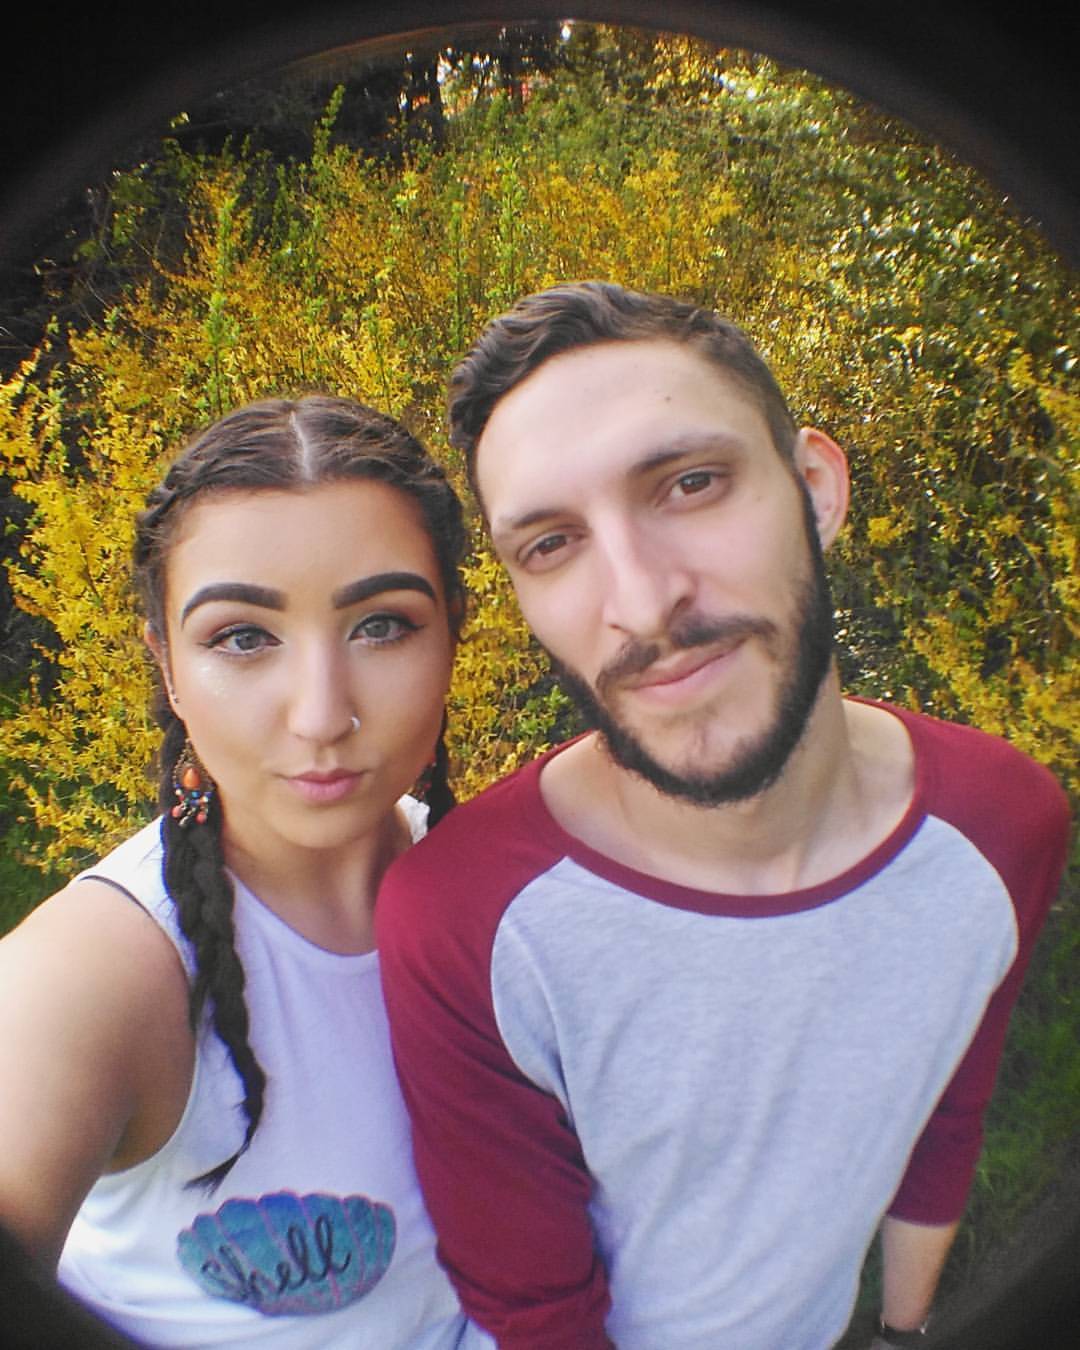 We go to the coolest places!   #selfie #me #us #fisheye #explore #braids #BFF #bf